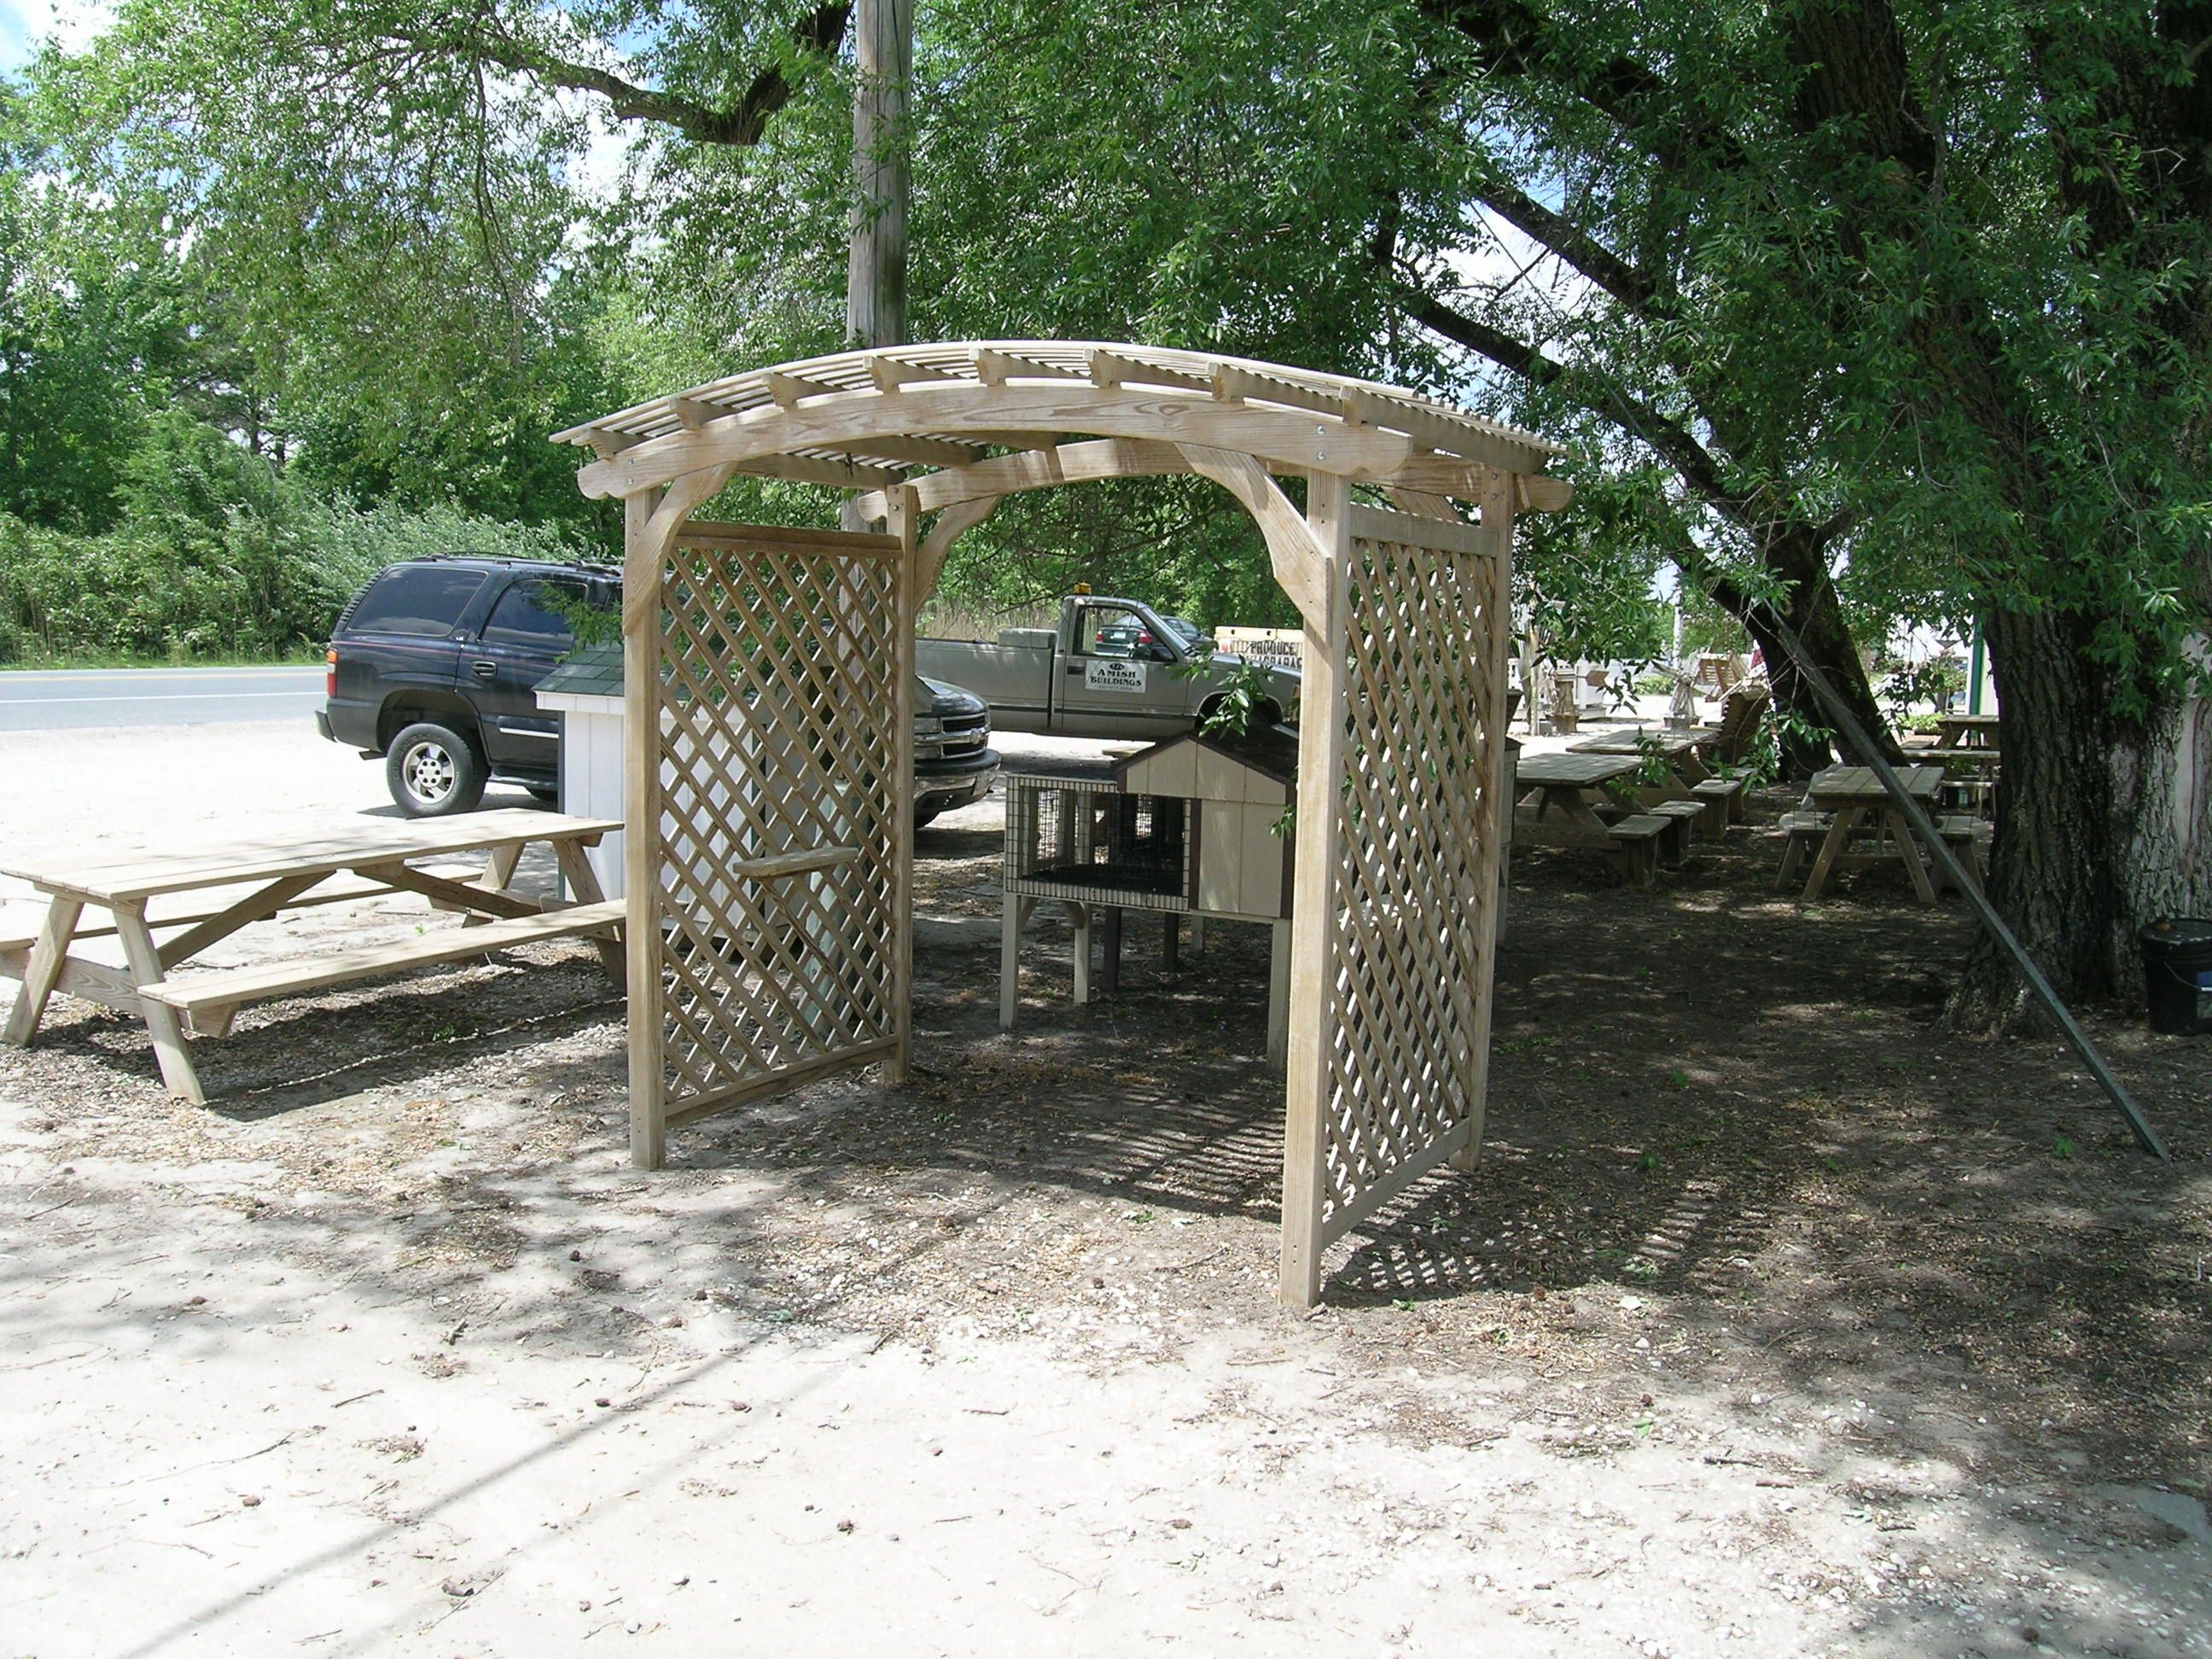 Large Arbor with Rabbit Hutch and Various Picnic Tables in the background